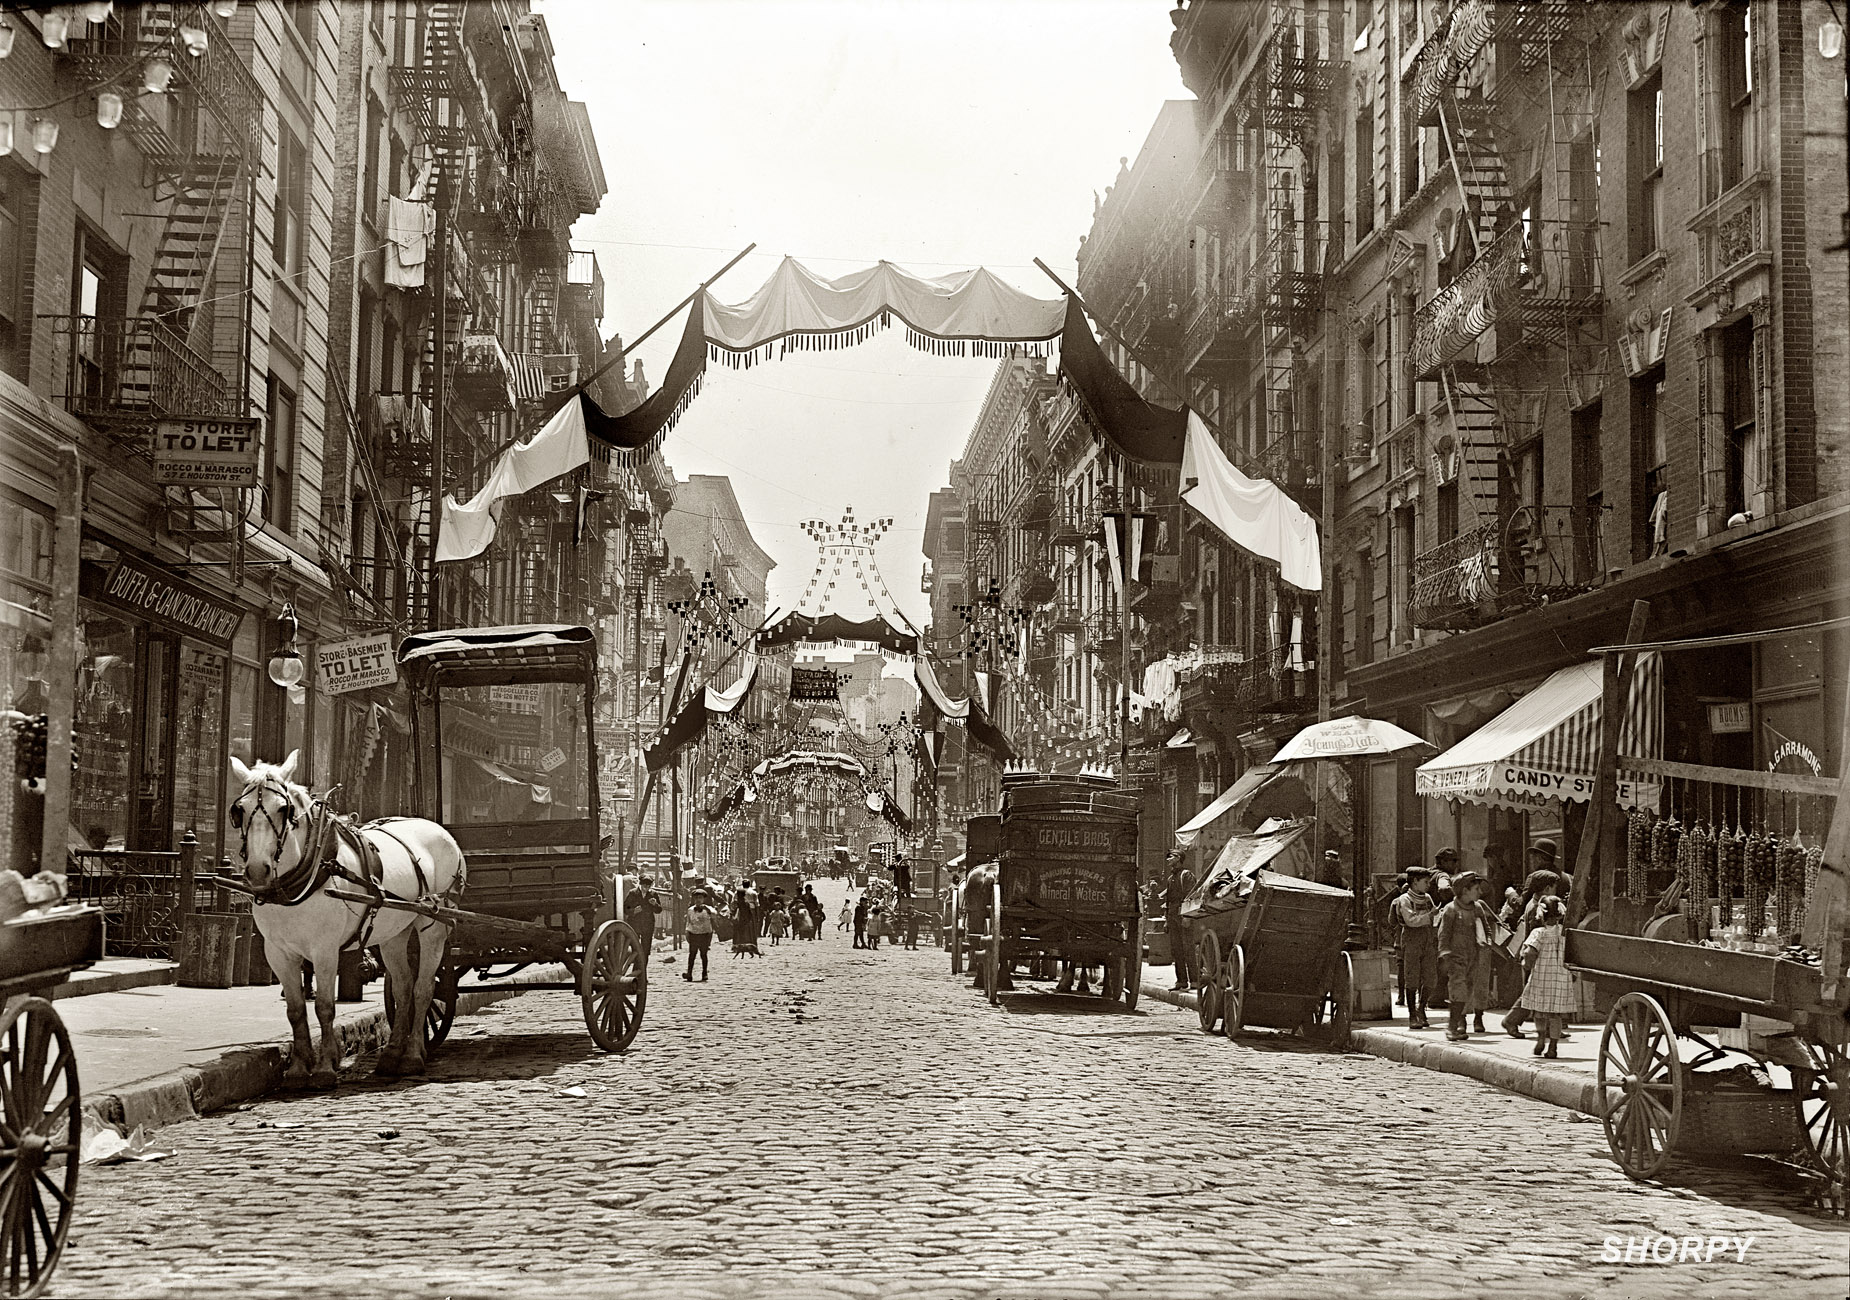 Mott Street all fancied up for a religious festival in 1908. It's May 16, so perhaps Ascension Day? (Cleaned up picture courtesy Shorpy)